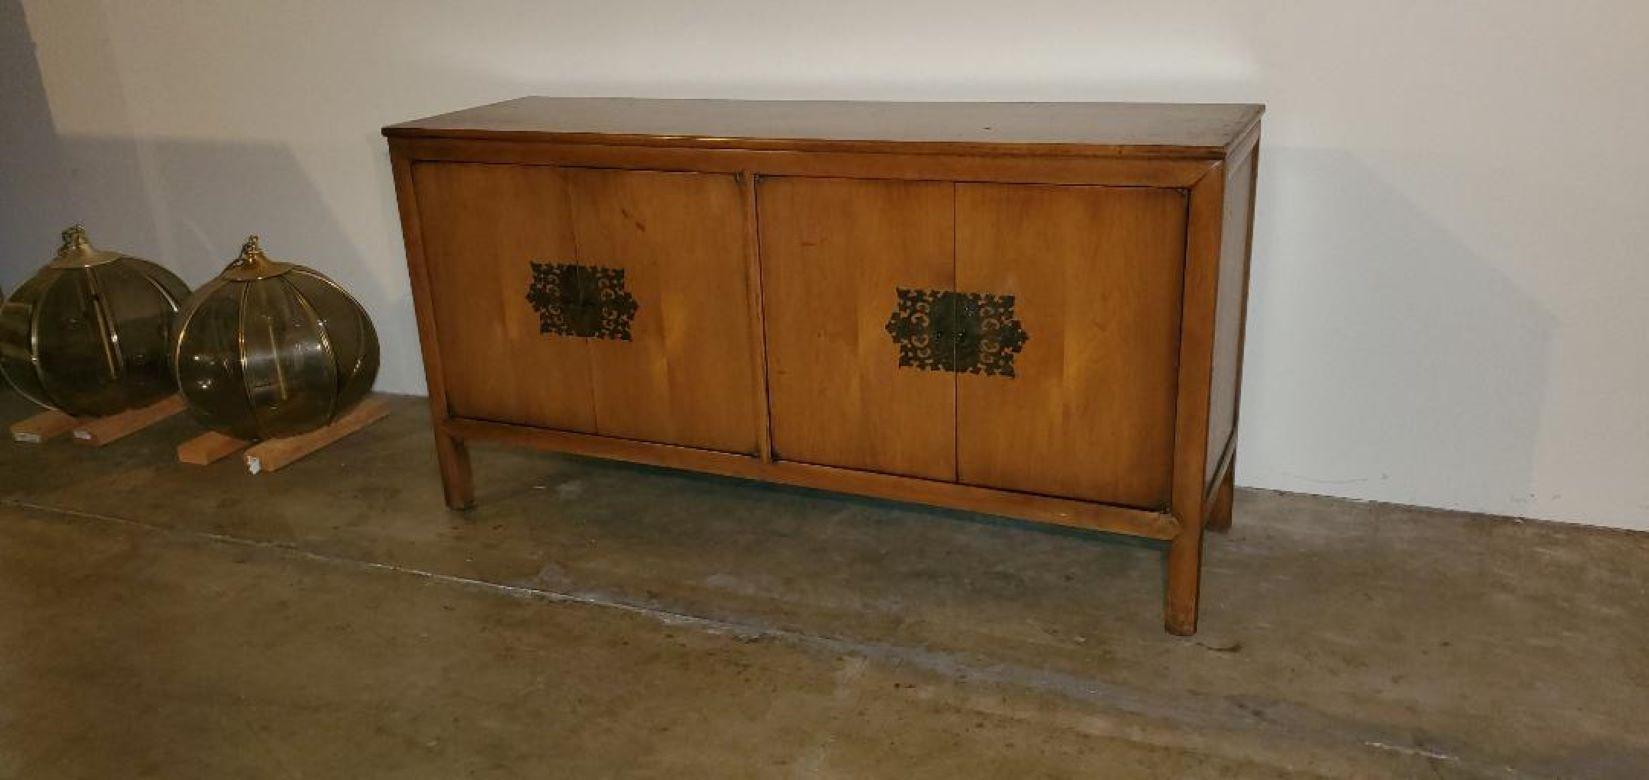 Wood 1960s Vintage Mid-Century Maple Buffet Credenza With Ornate Faux Brass Key Knobs For Sale